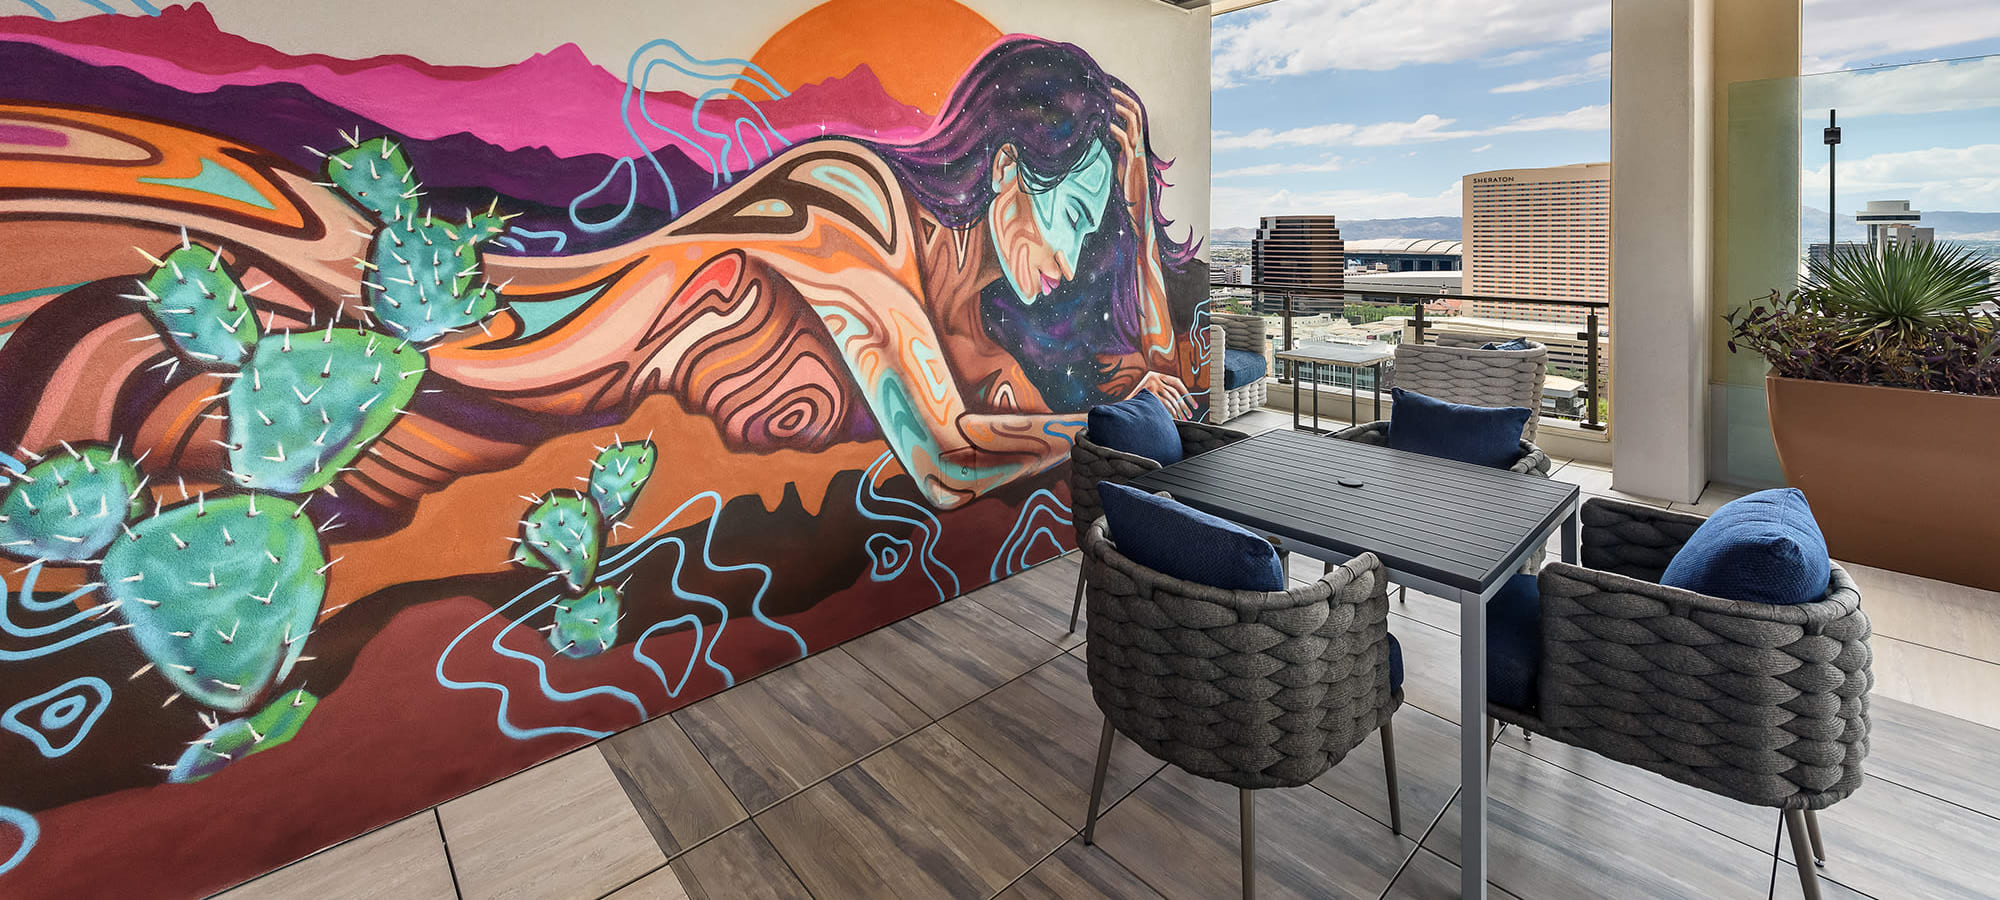 Seating area with mural at Derby in Phoenix, Arizona